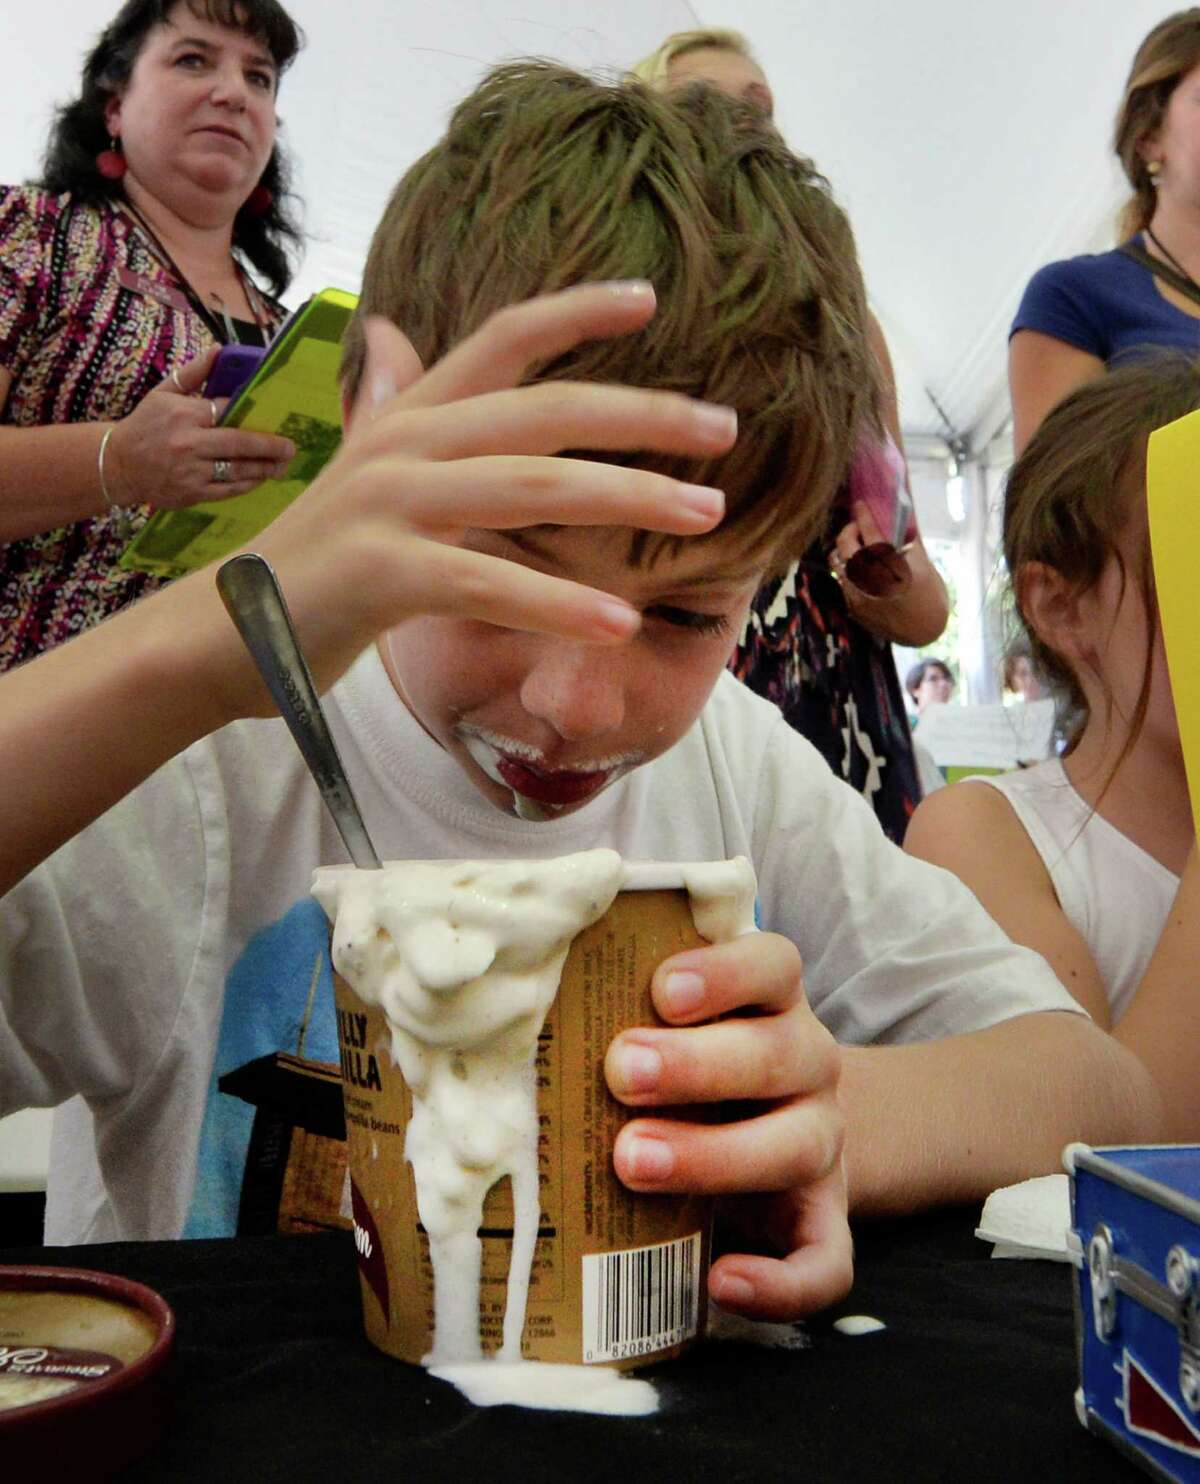 Andrew Desso, 9, of Painted Post has a little brain freeze while devouring a pint of Stewart's Philly Vanilla ice cream during the annual Stewart's ice cream eating contest Wednesday, Aug 19, 2013, at the Saratoga Race Course in Saratoga Springs, N.Y. The contest is held annually during Travers Stakes week at the Spa. (Skip Dickstein/Times Union)